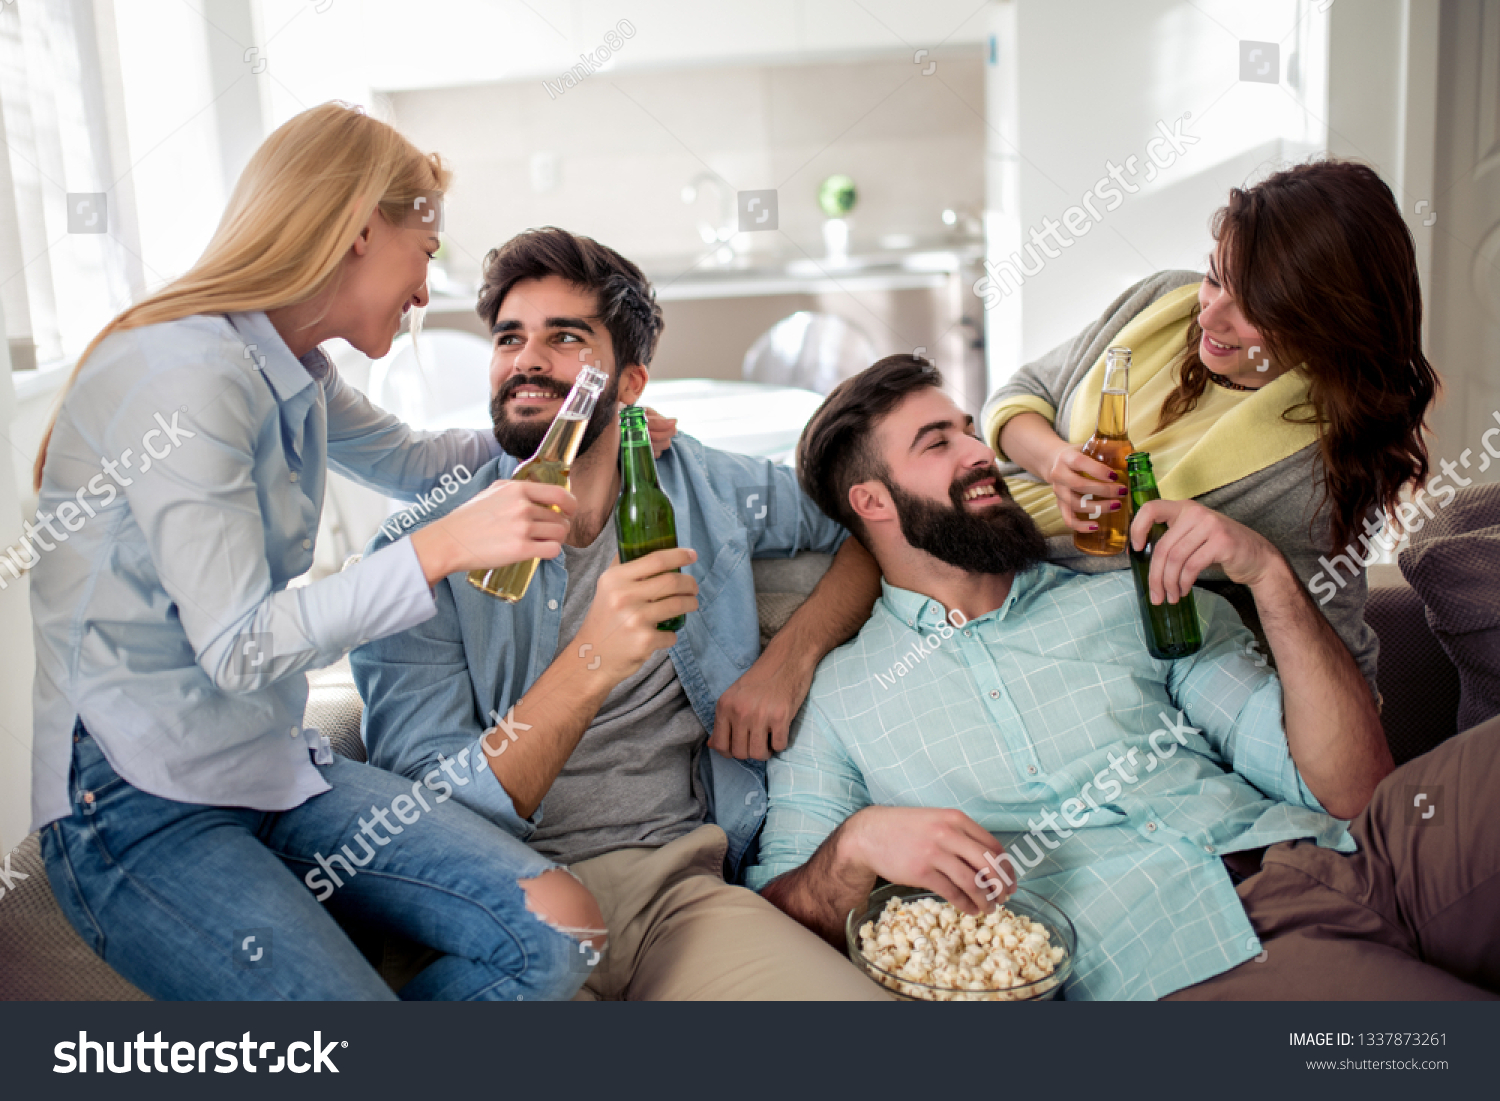 Group of friends sitting on the couch and watching football game. Friendship and party concept. #1337873261